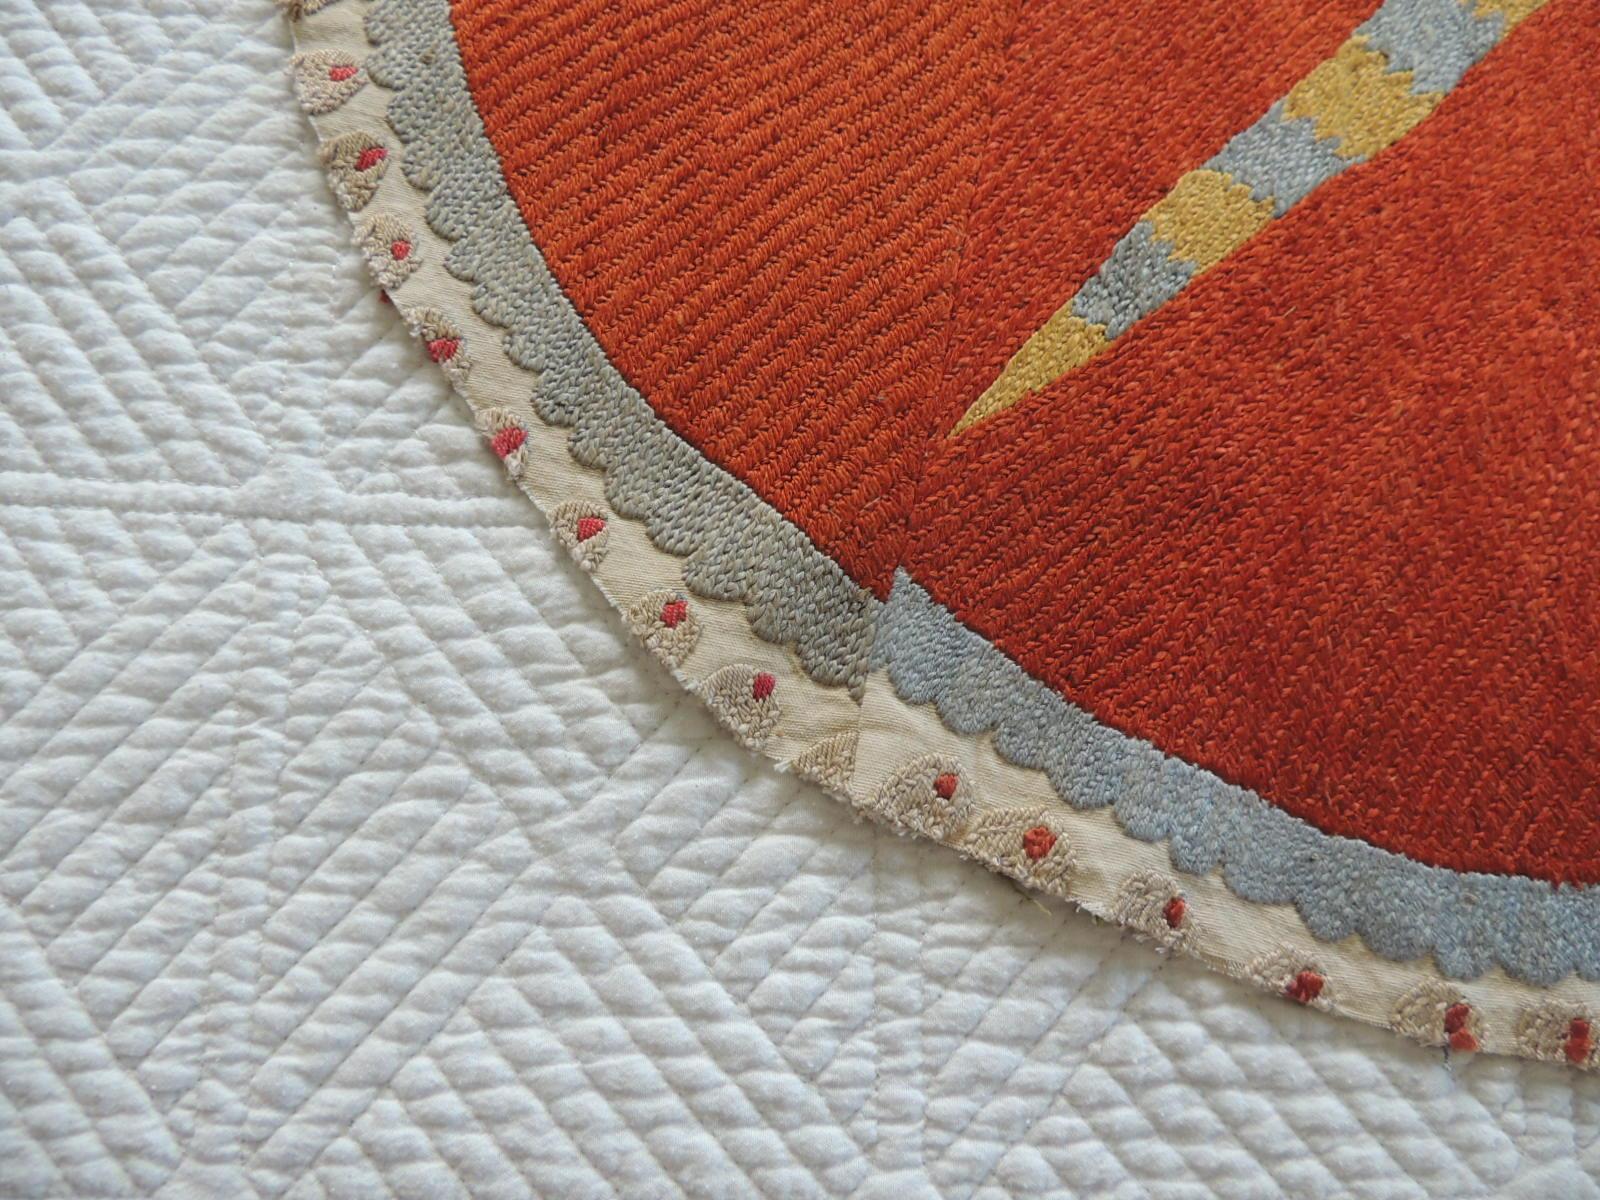 Vintage orange and yellow oval Suzani textile fragment.
Circular woven pattern with a sunburst design center.
In shades of orange, yellow, grey, natural and red.
Ideal for upholstery or to make into pillow.
Size: 20.5